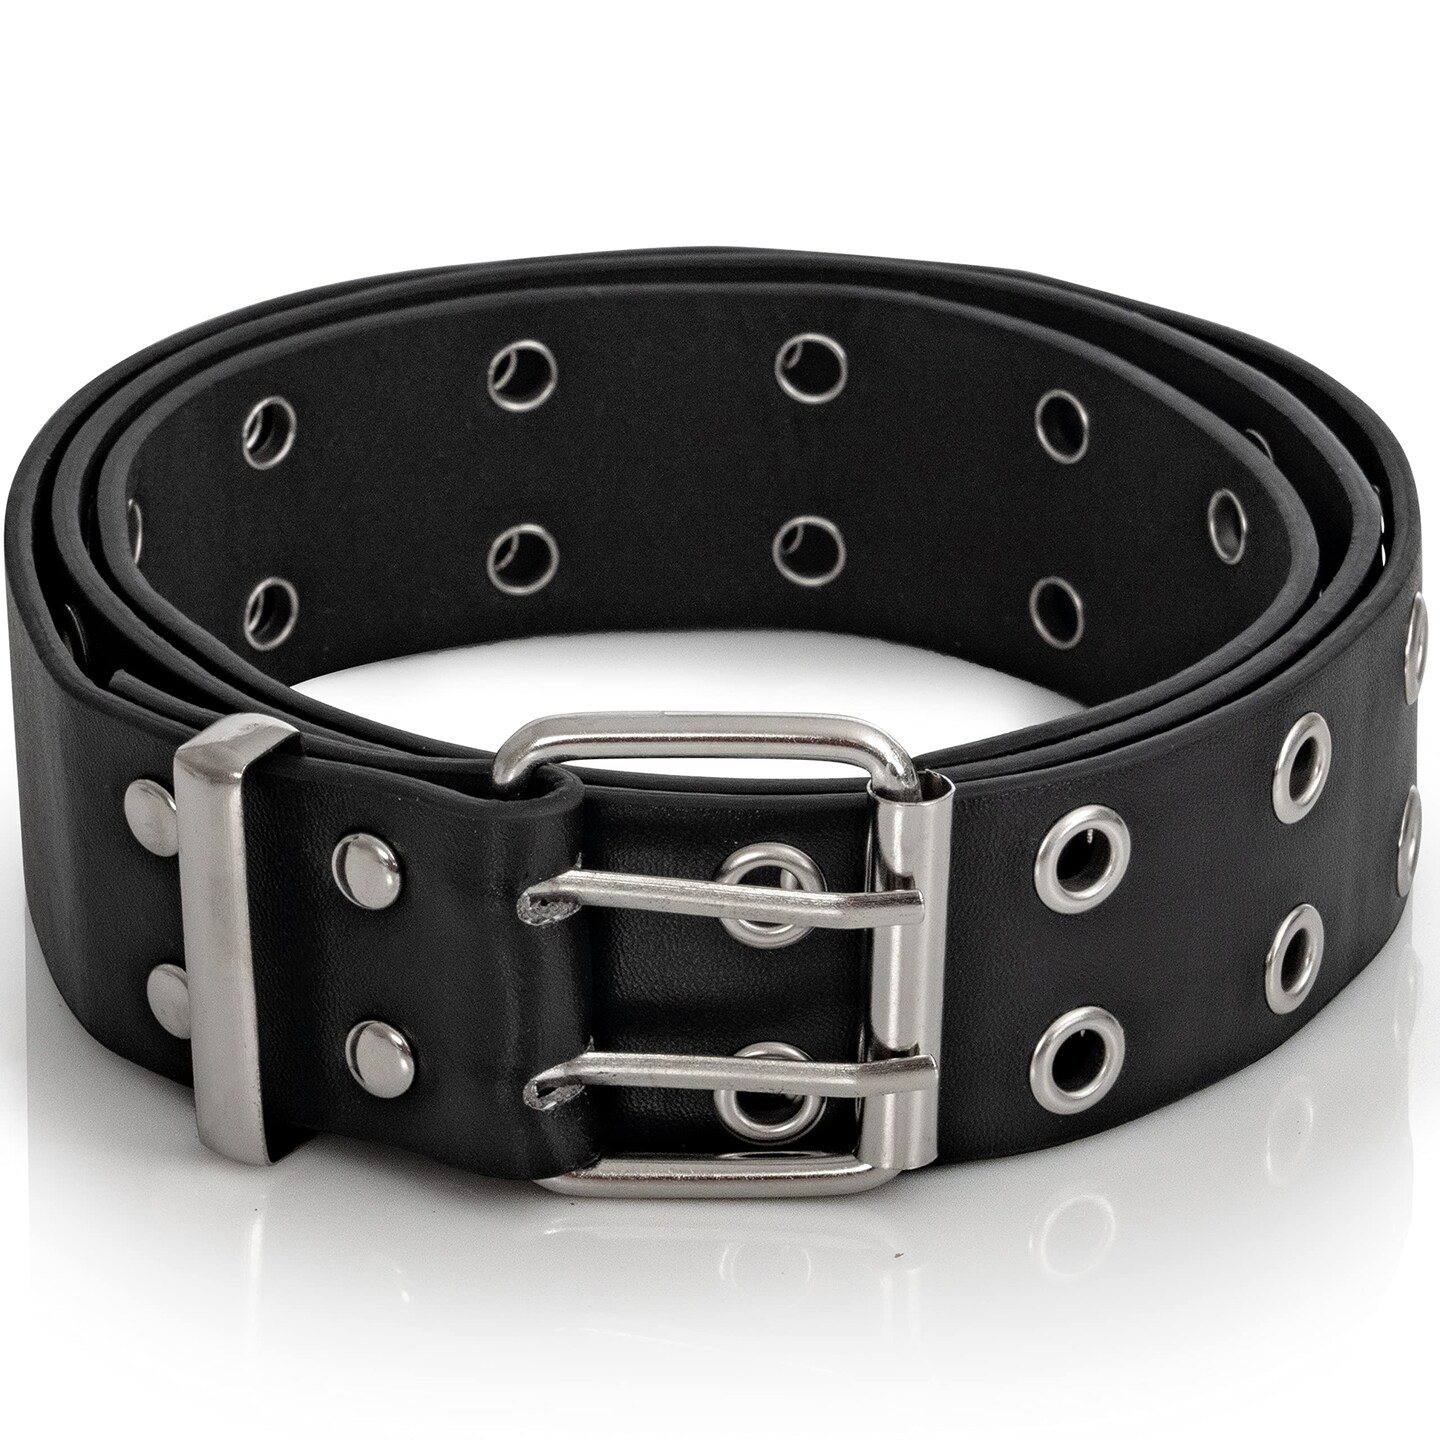 Double Grommet Punk Belt - Black Faux Leather 2 Prong and Holes Aesthetic Grunge Belts for Men Women and Kids Size Small